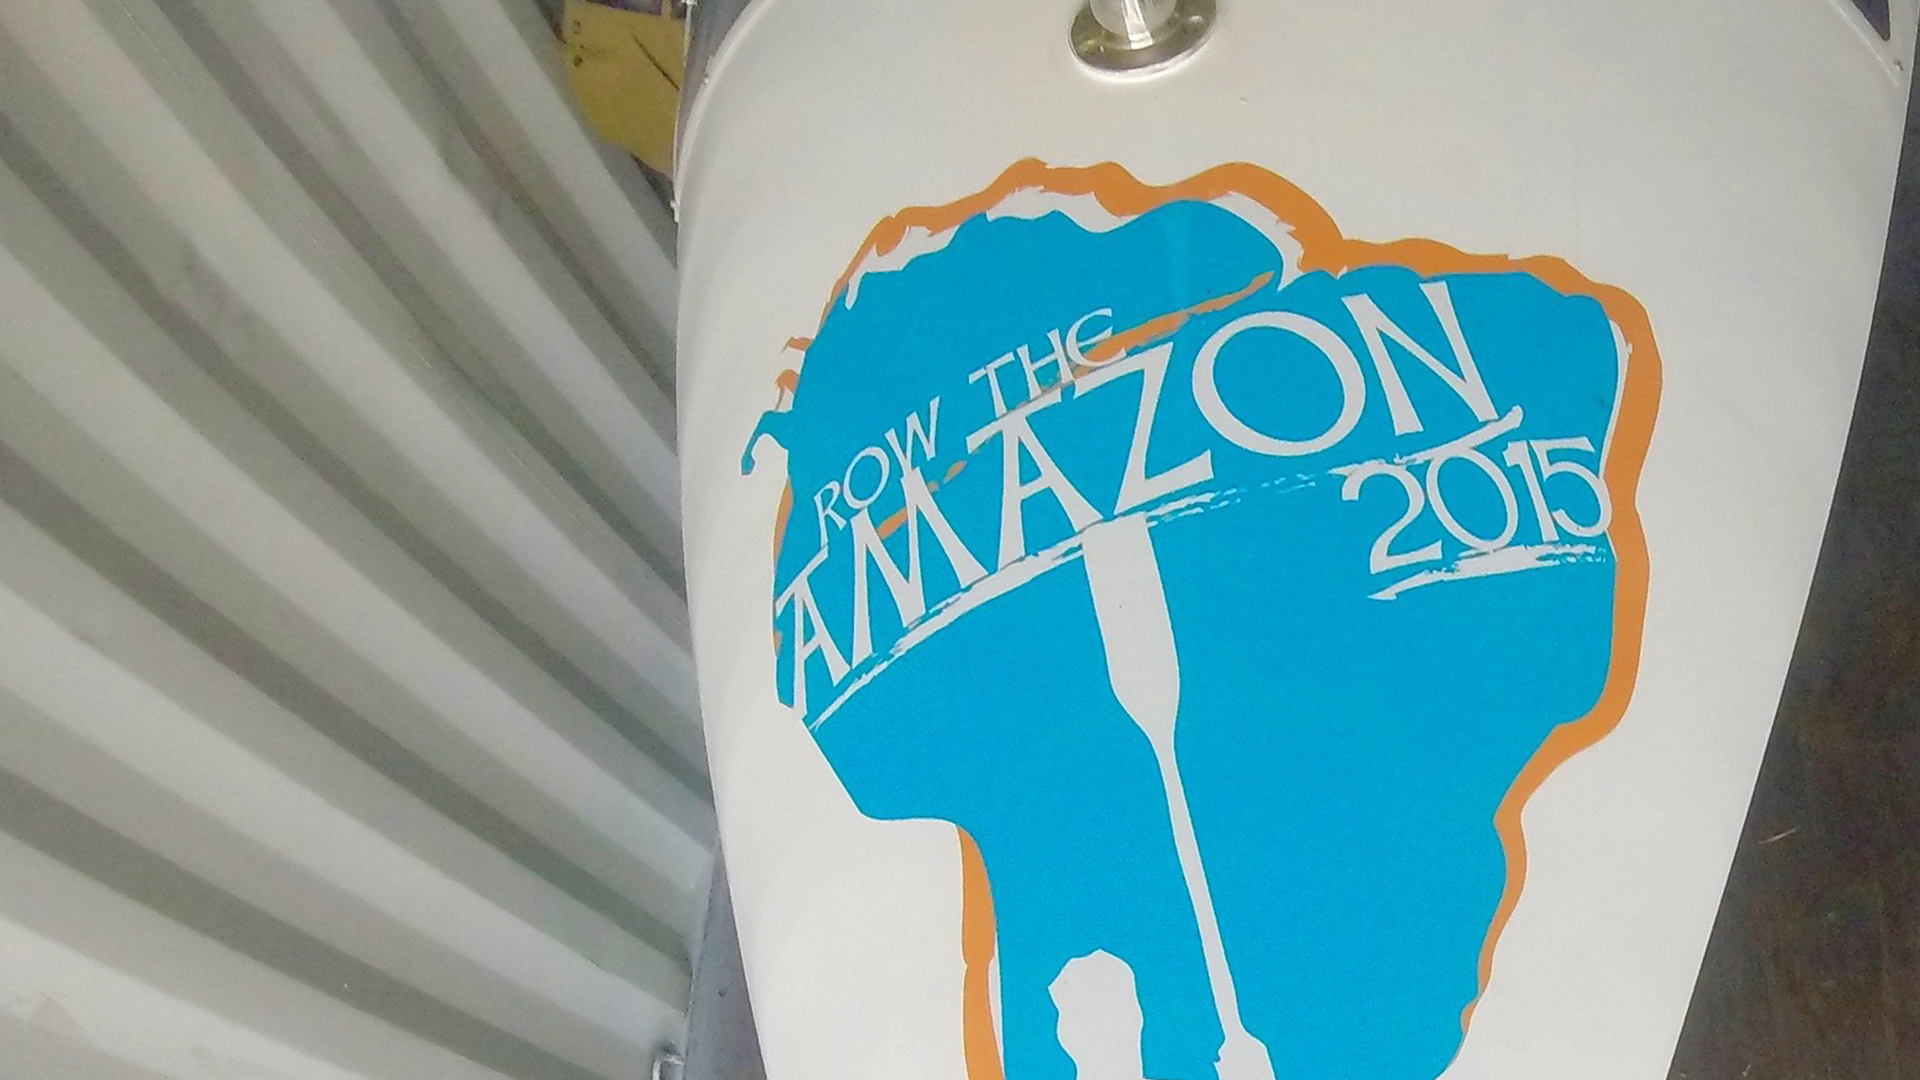 Row the Amazon 2015 - The Bishop is on its way!